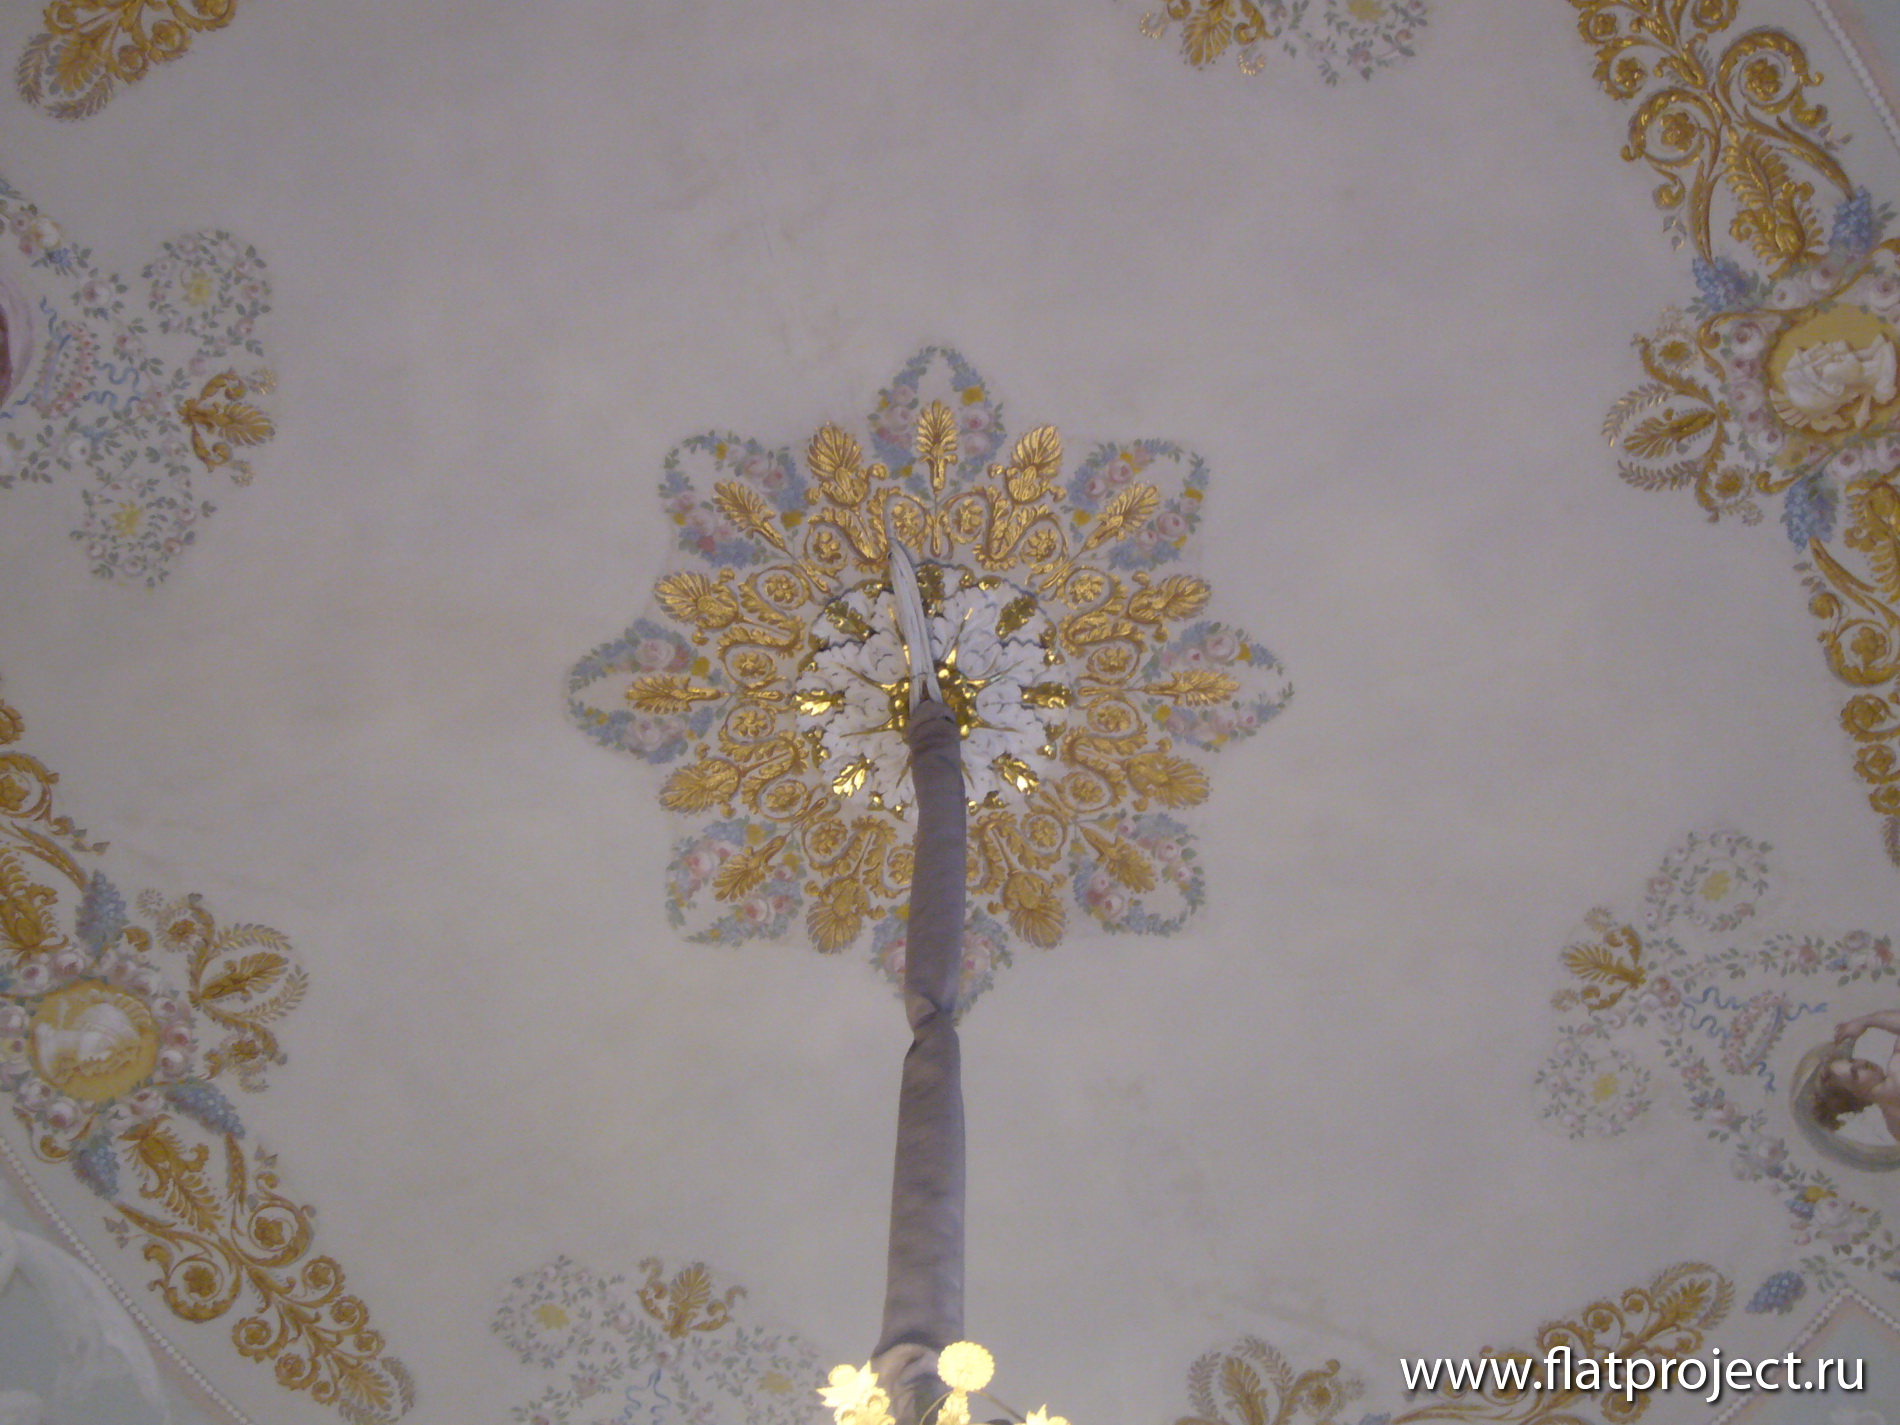 The State Russian museum interiors – photo 64